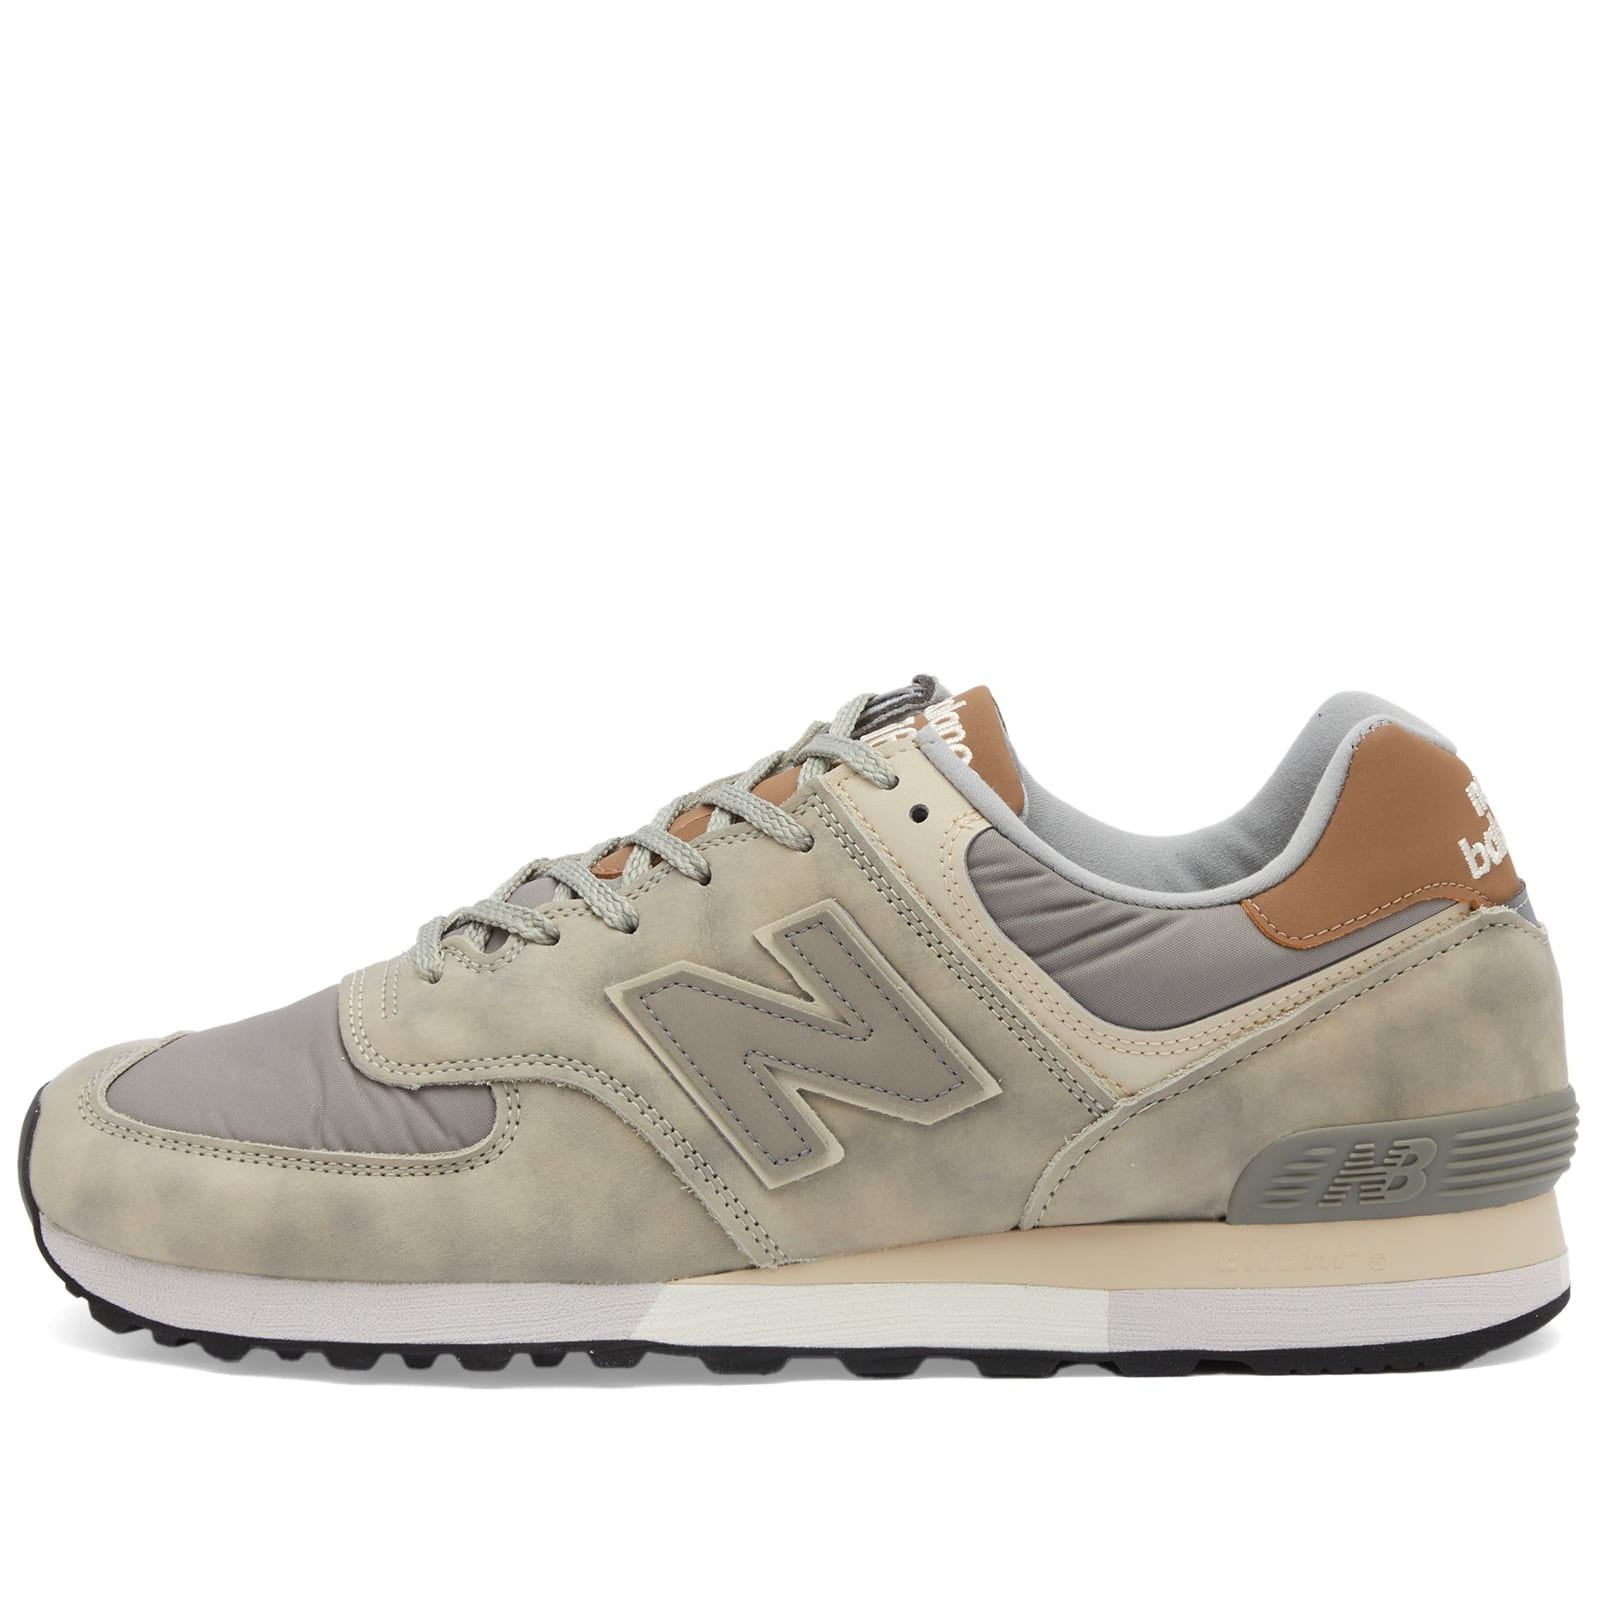 New Balance OU576GT - Made in UK - 2